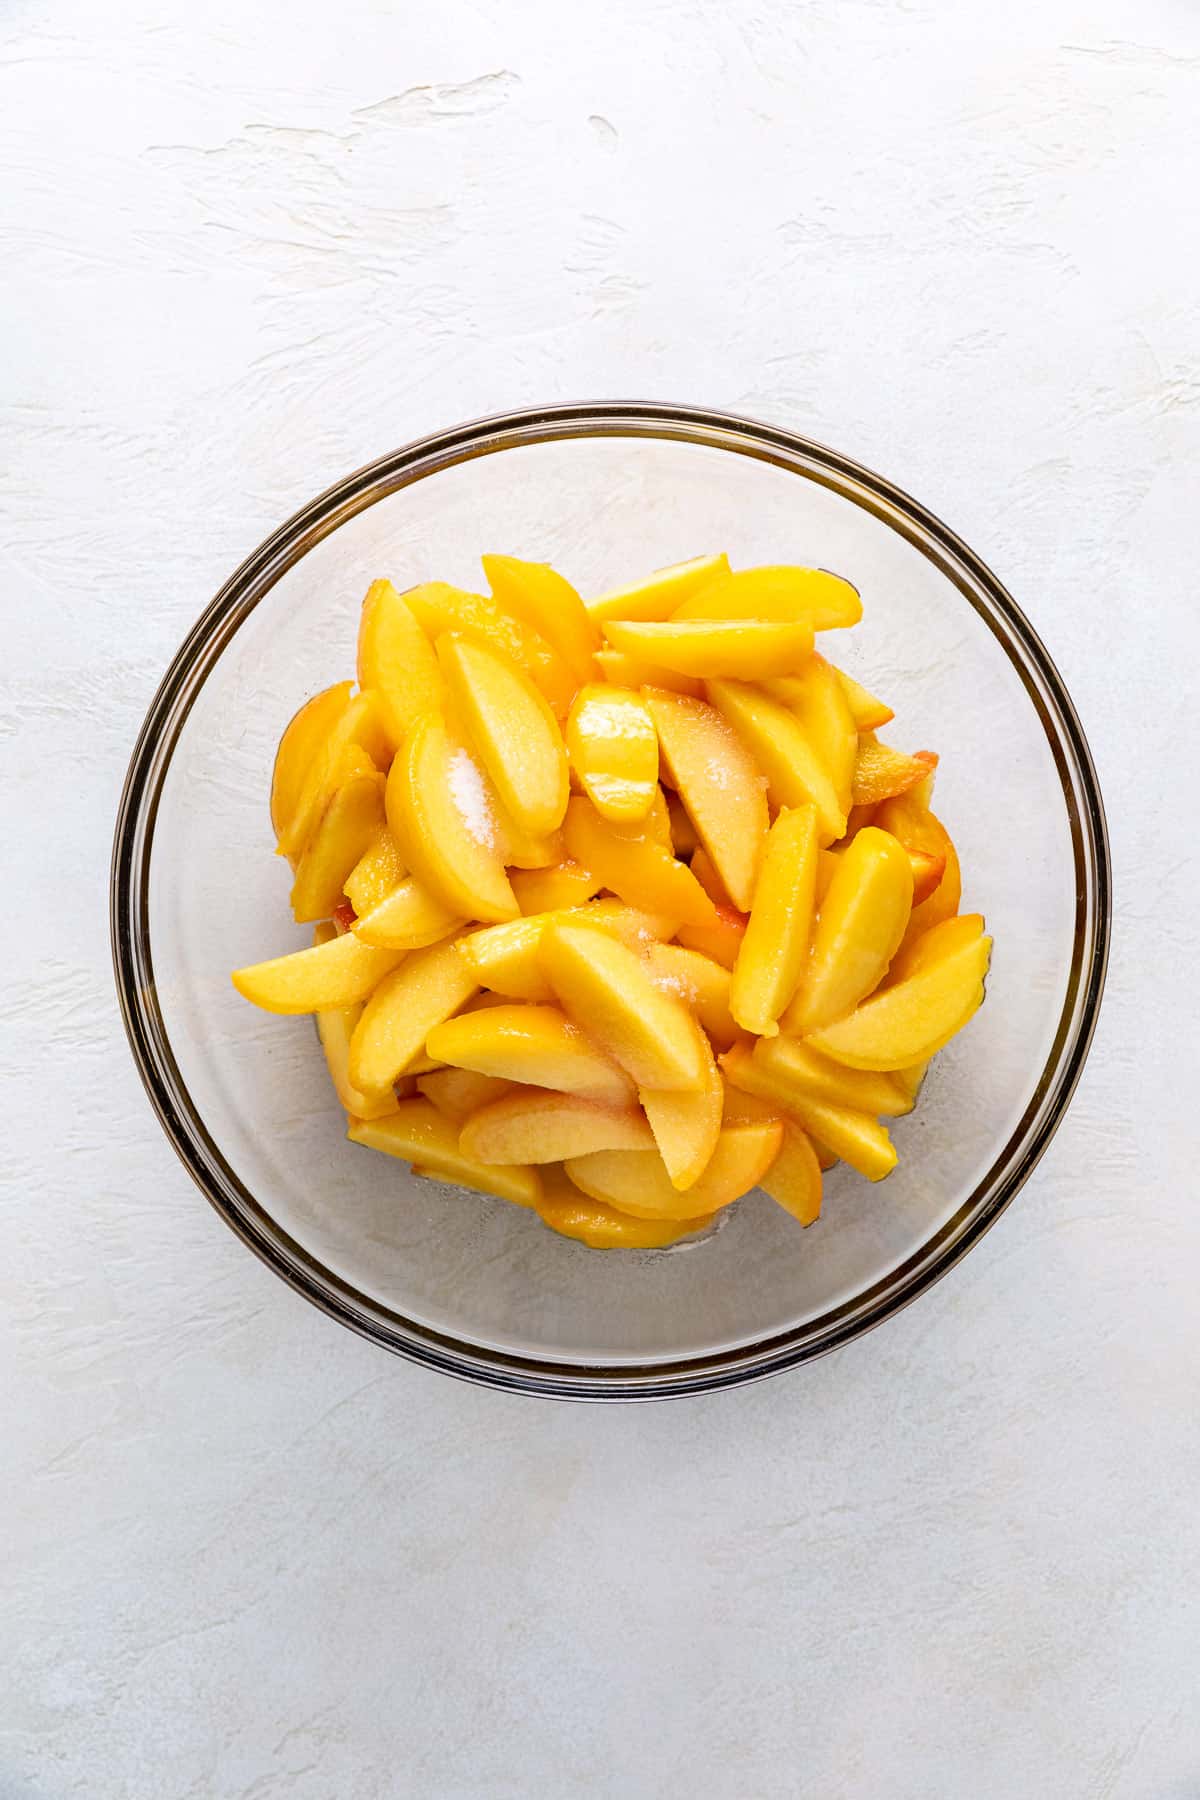 Peach slices with sugar in a bowl.